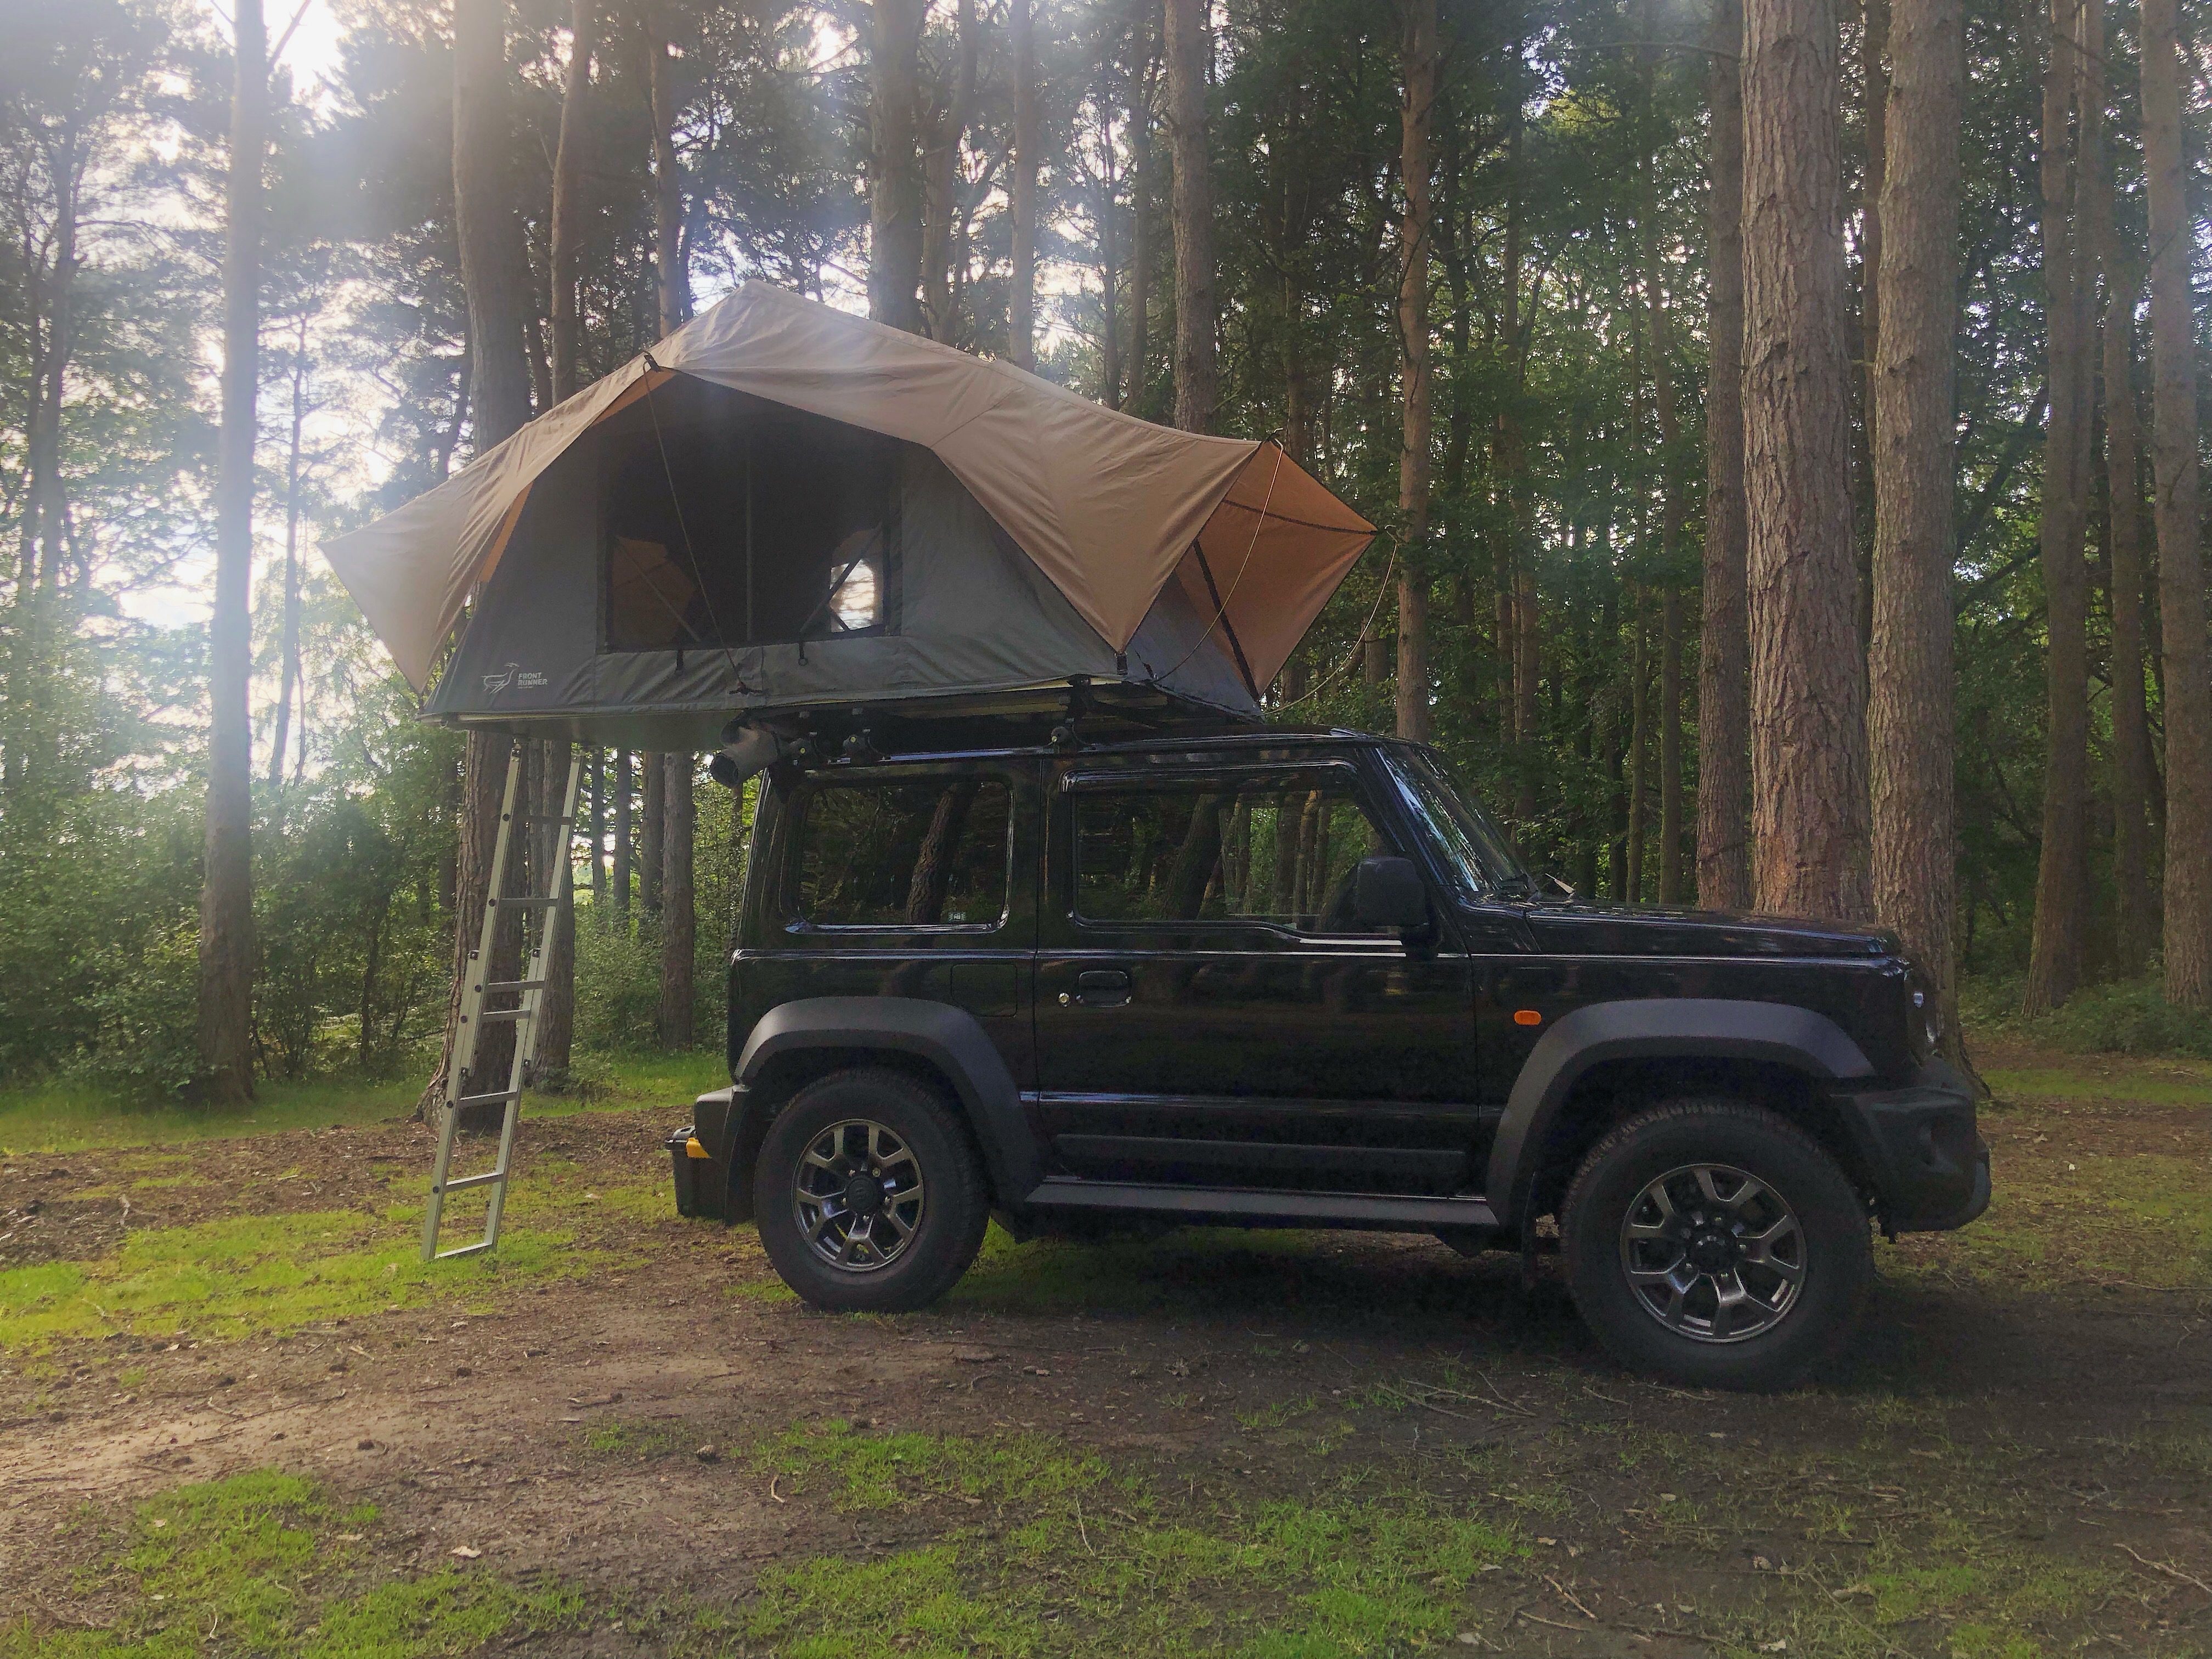 Suzuki Jimny Roof Tent Camping in the Woods